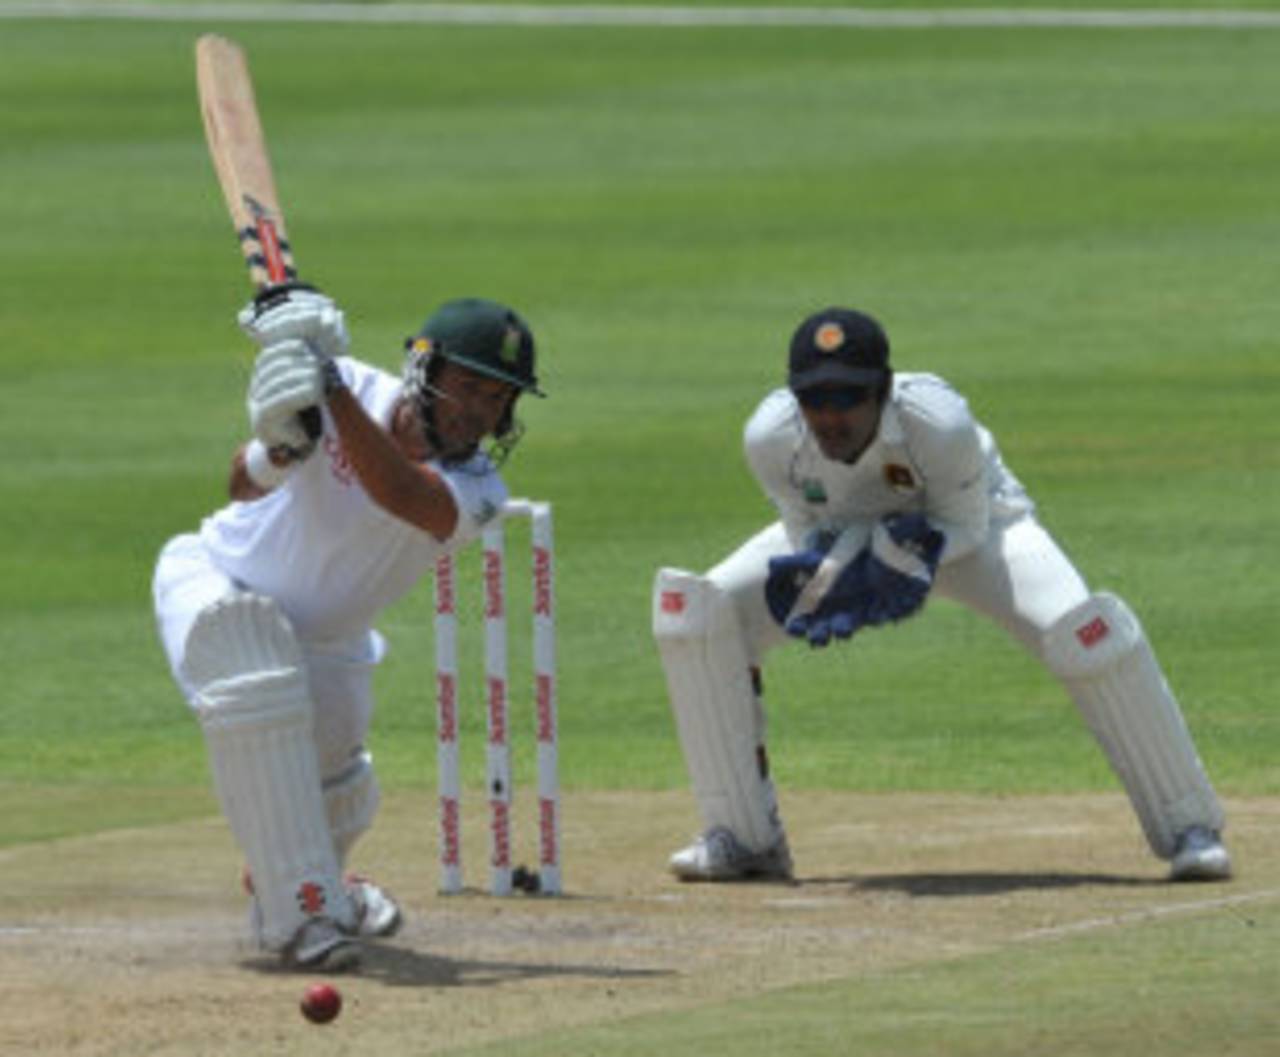 Jacques Rudolph drives through the off side, South Africa v Sri Lanka, 3rd Test, Cape Town, 2nd day, January 4, 2012